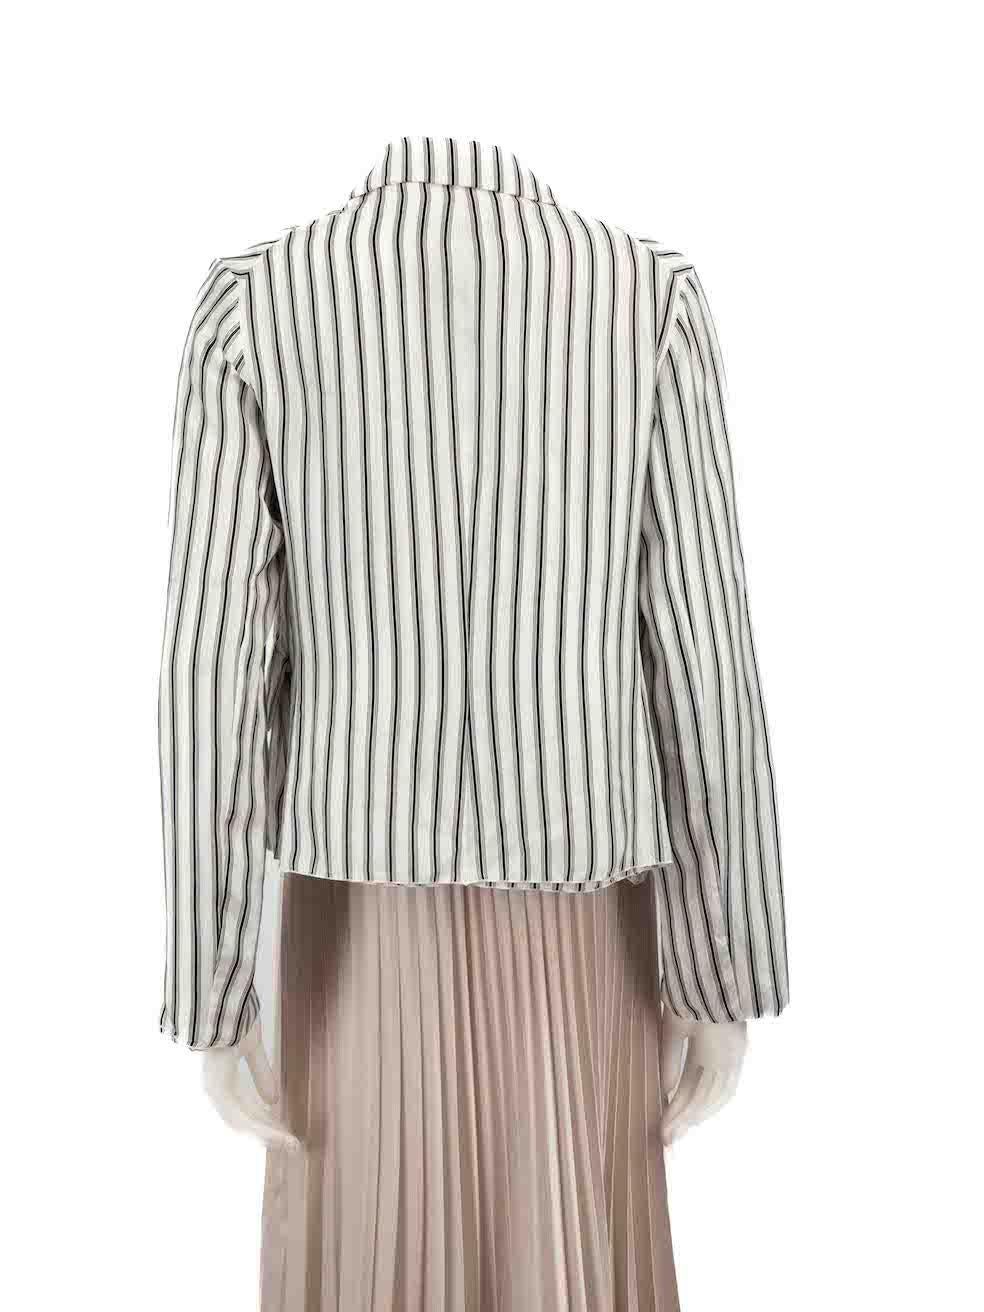 Marni White Stripe Pattern Jacket Size S In Excellent Condition For Sale In London, GB